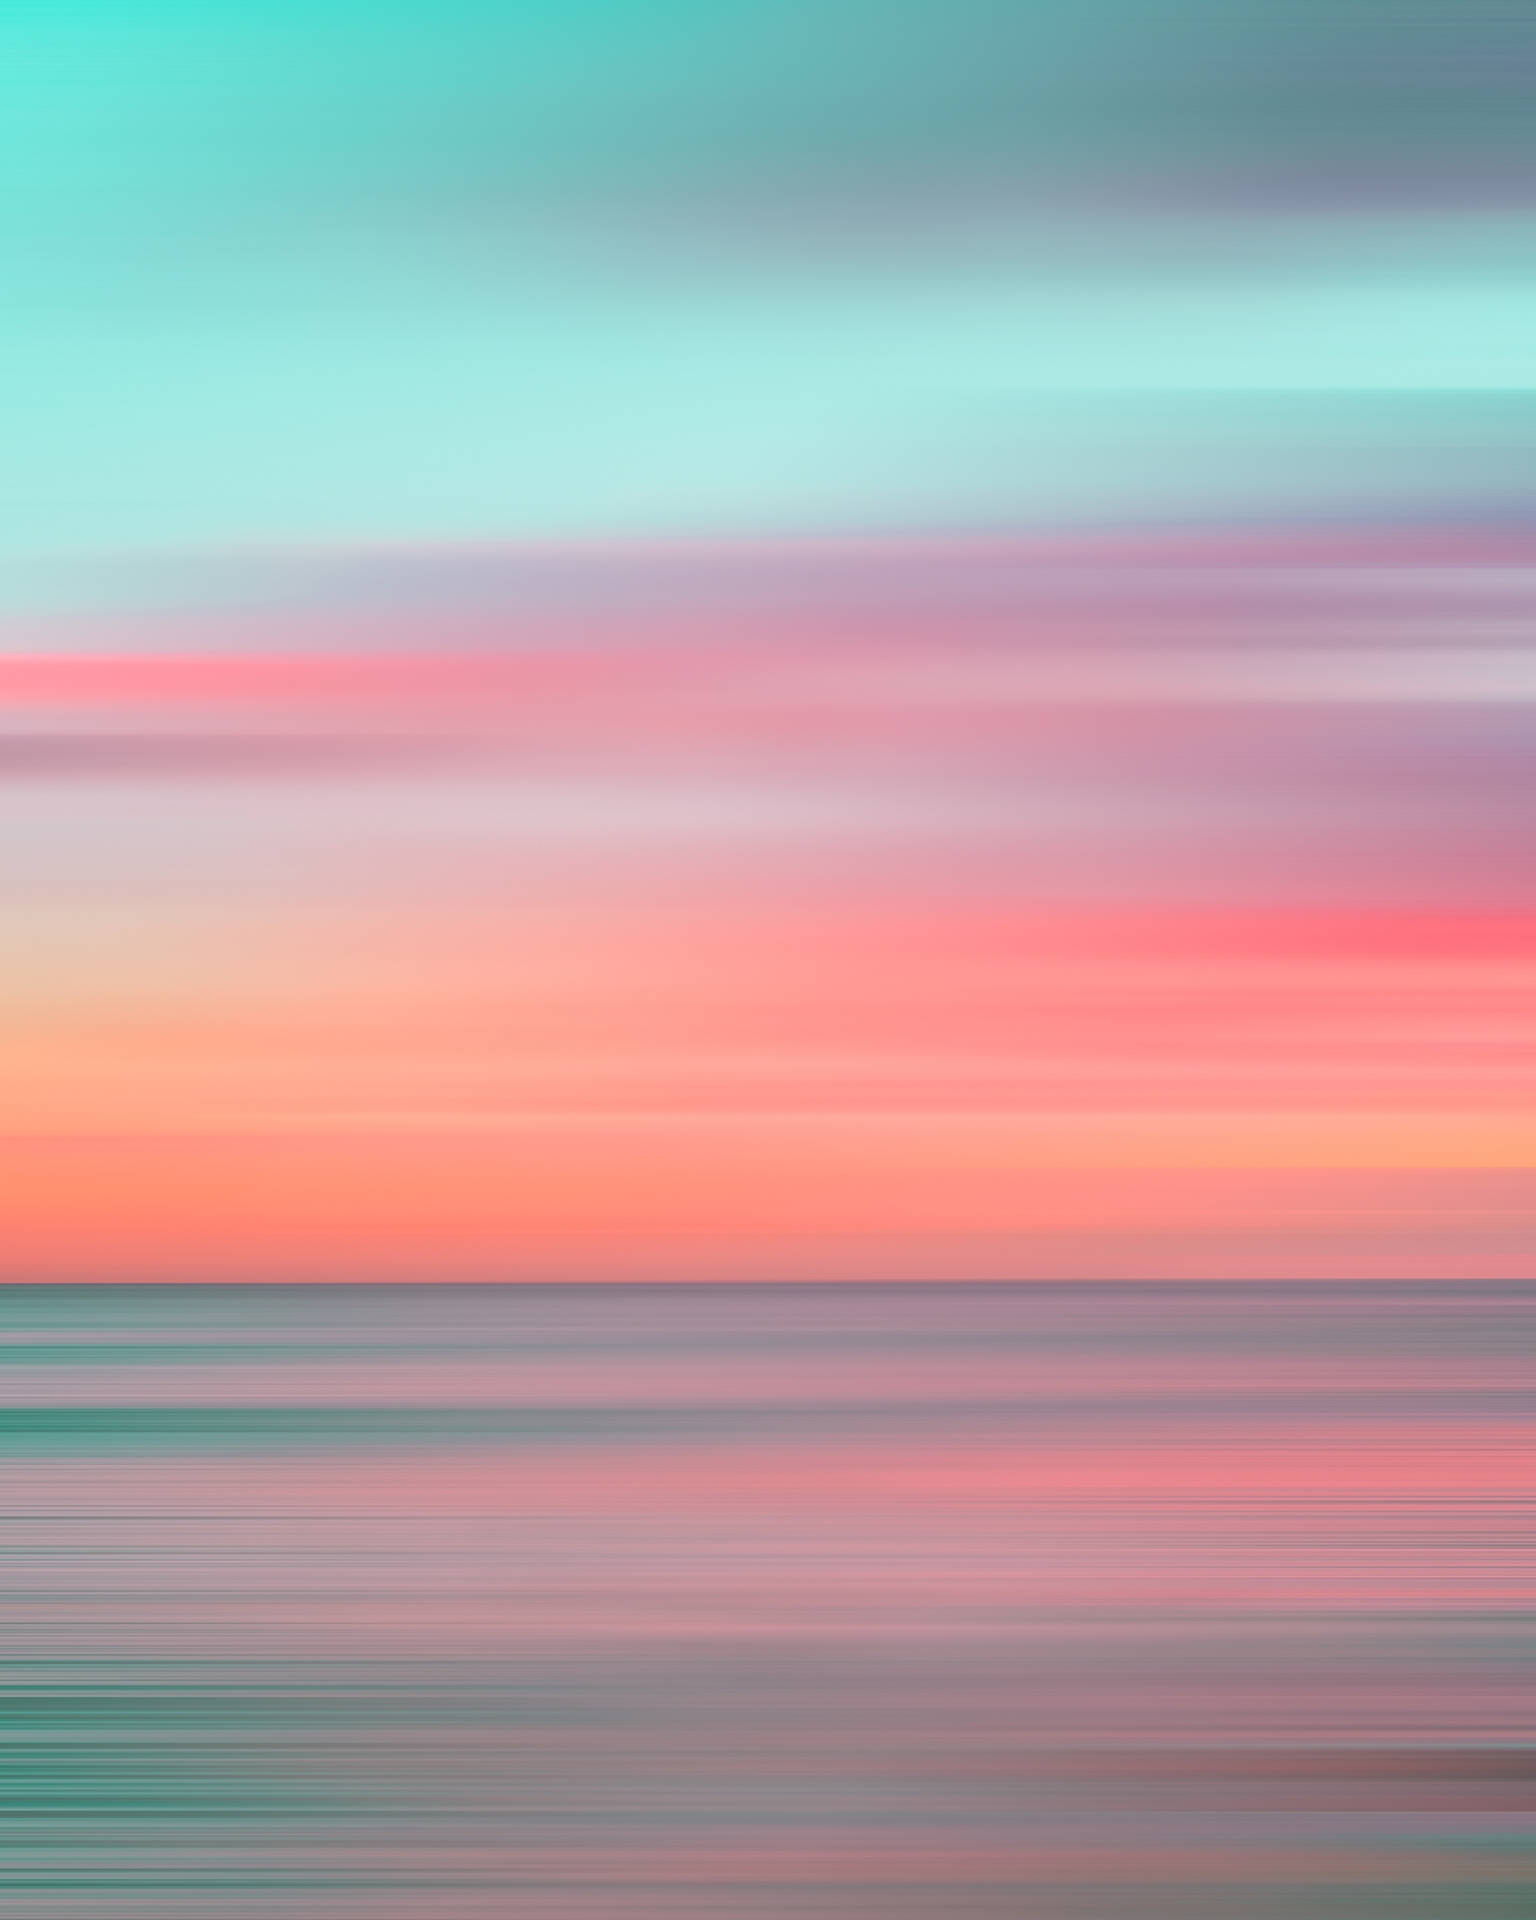 Painting the World with a Hazy Pastel Palette Wallpaper